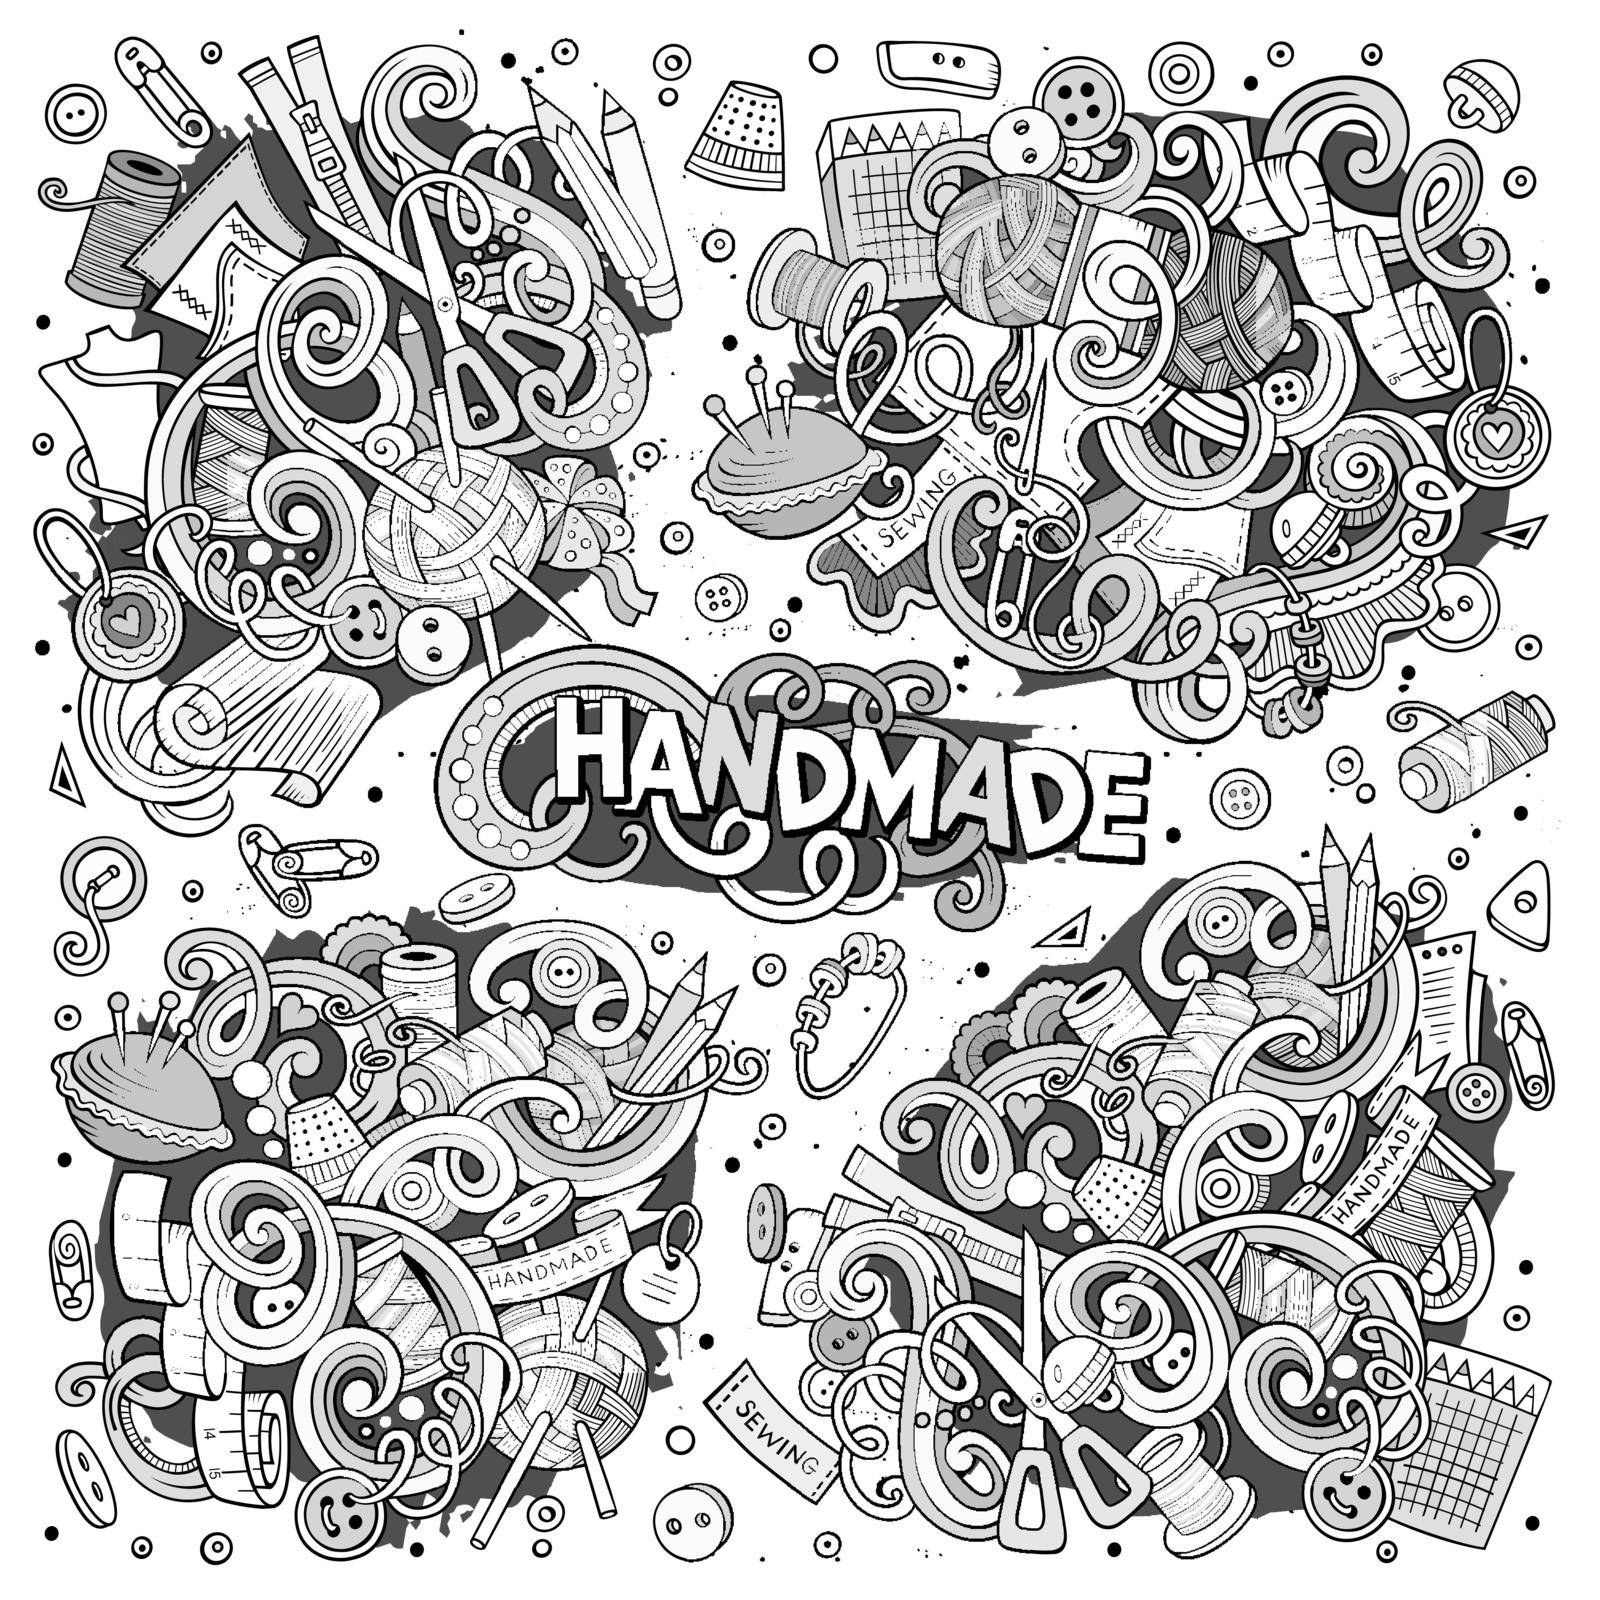 Line art vector hand drawn doodle cartoon set of handmade objects and symbols designs.